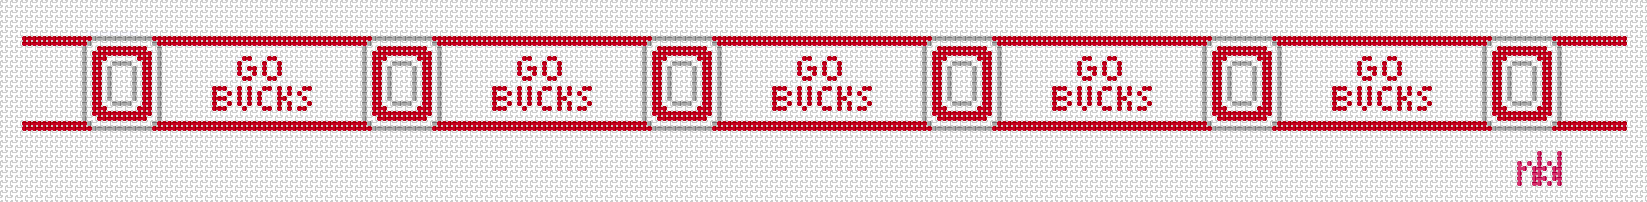 Ohio State Purse Insert And Strap - Needlepoint by Laura